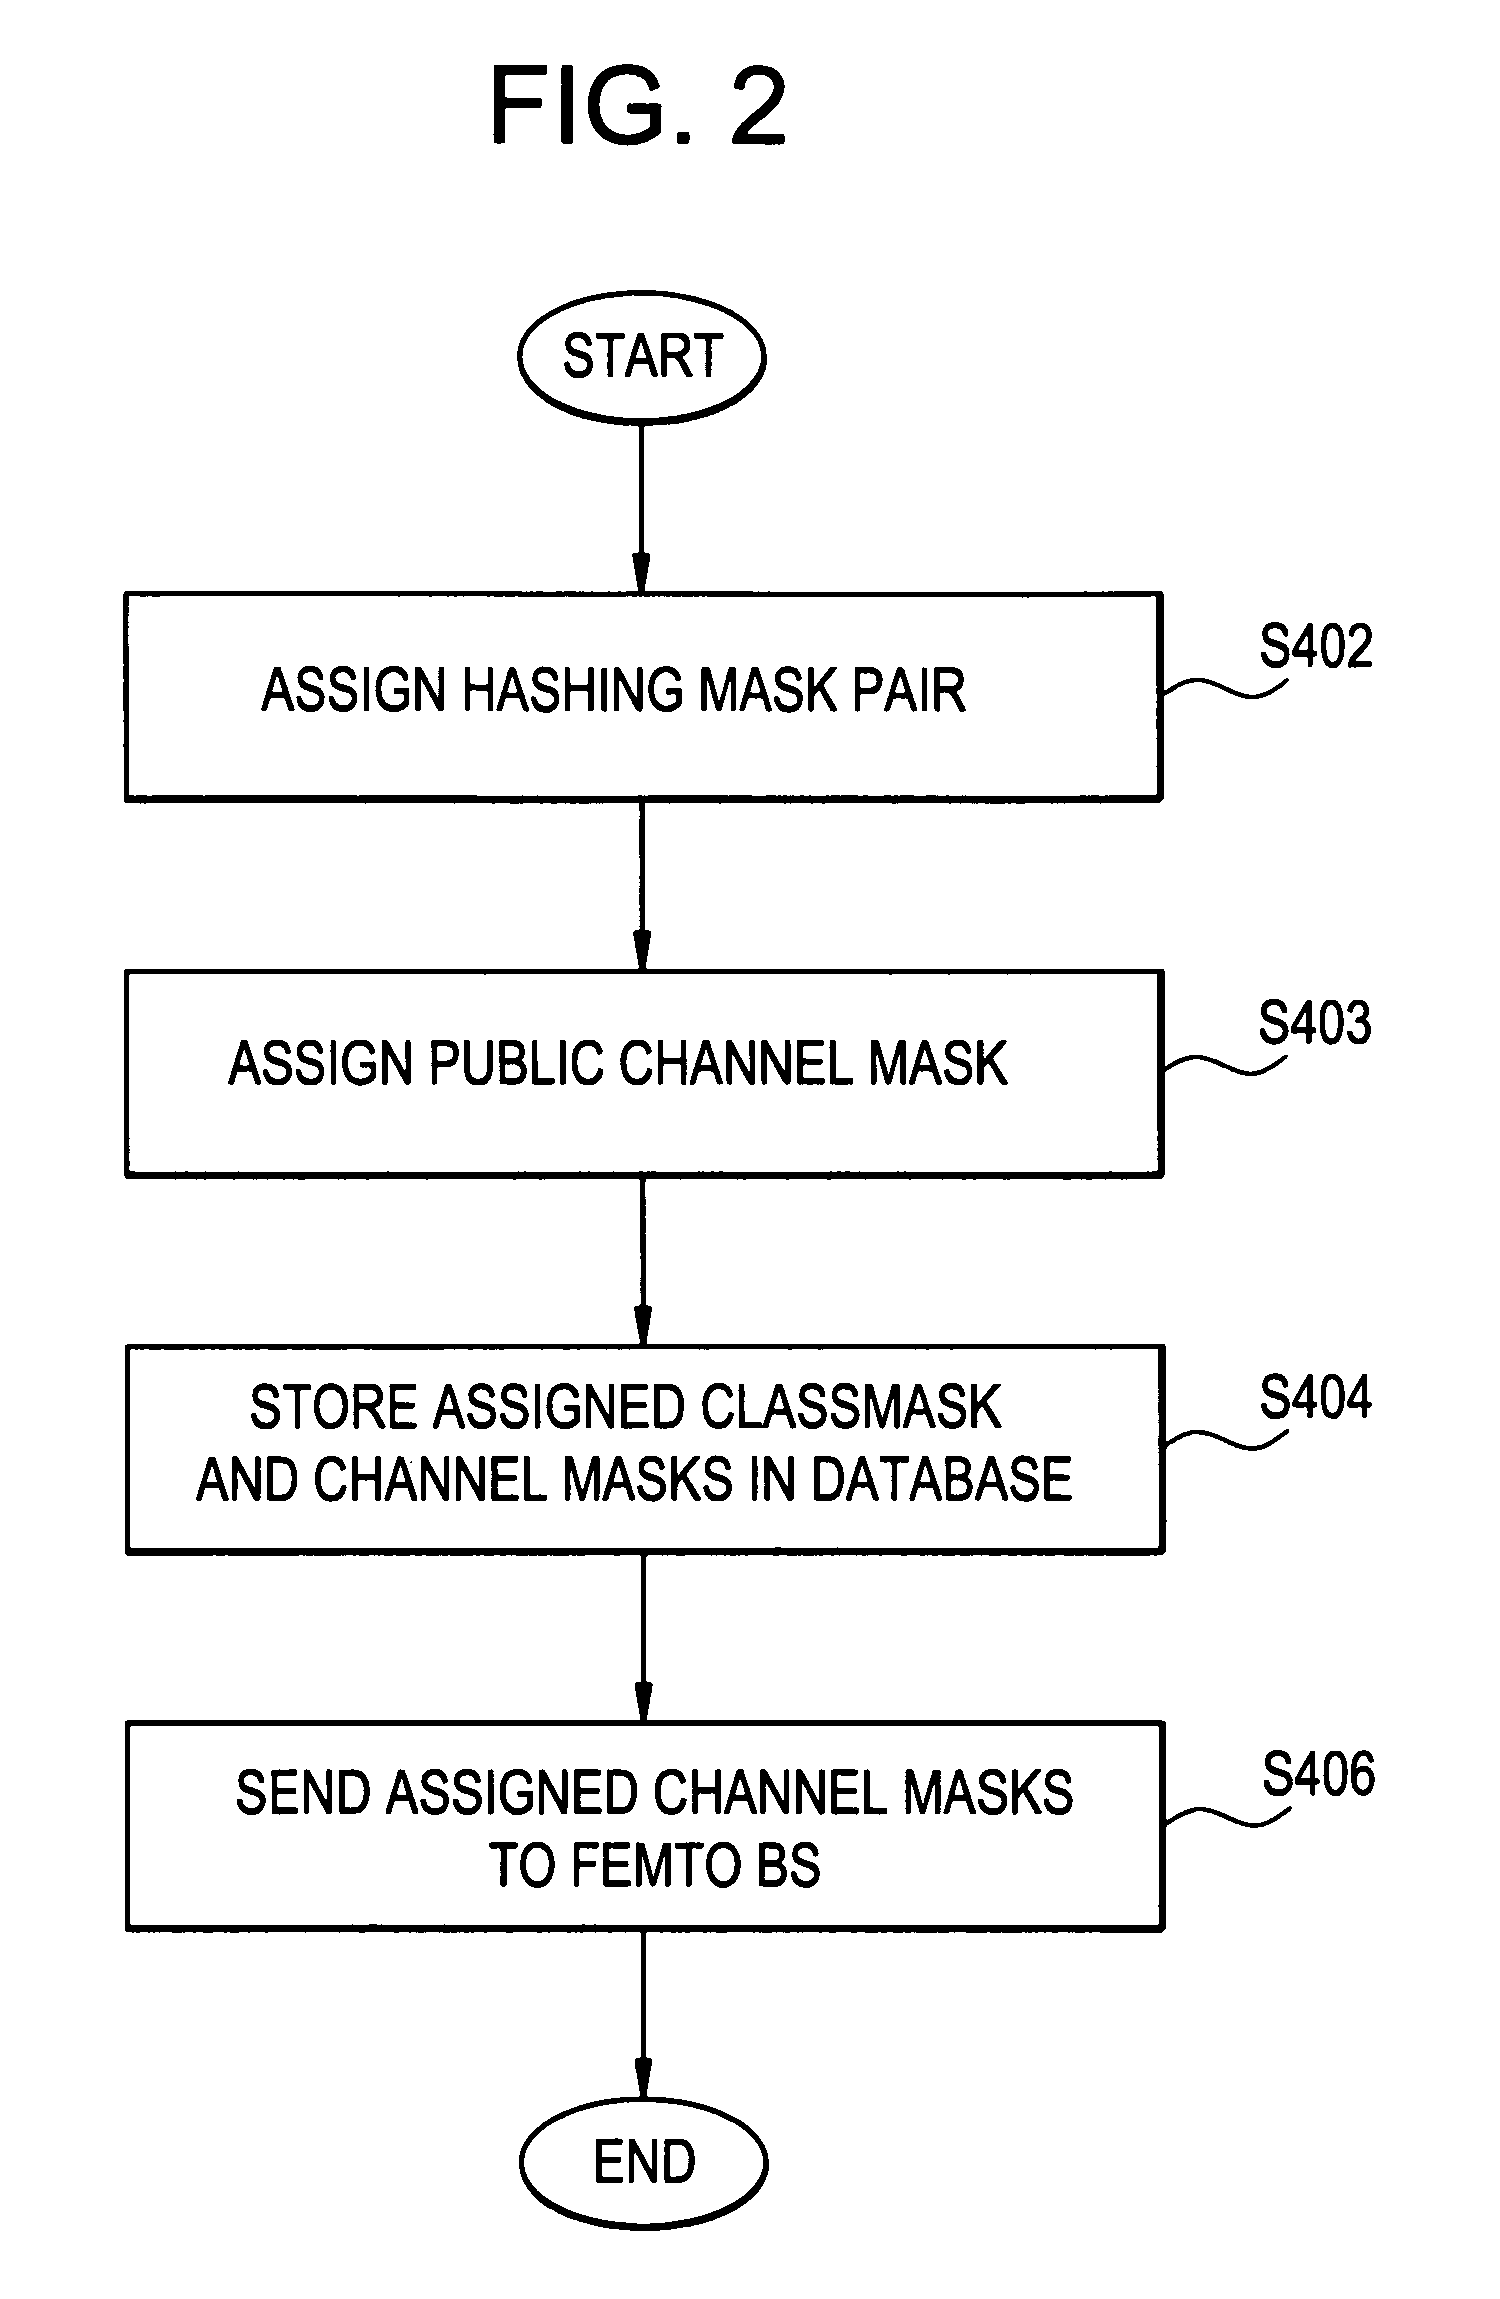 Methods for access control in femto systems